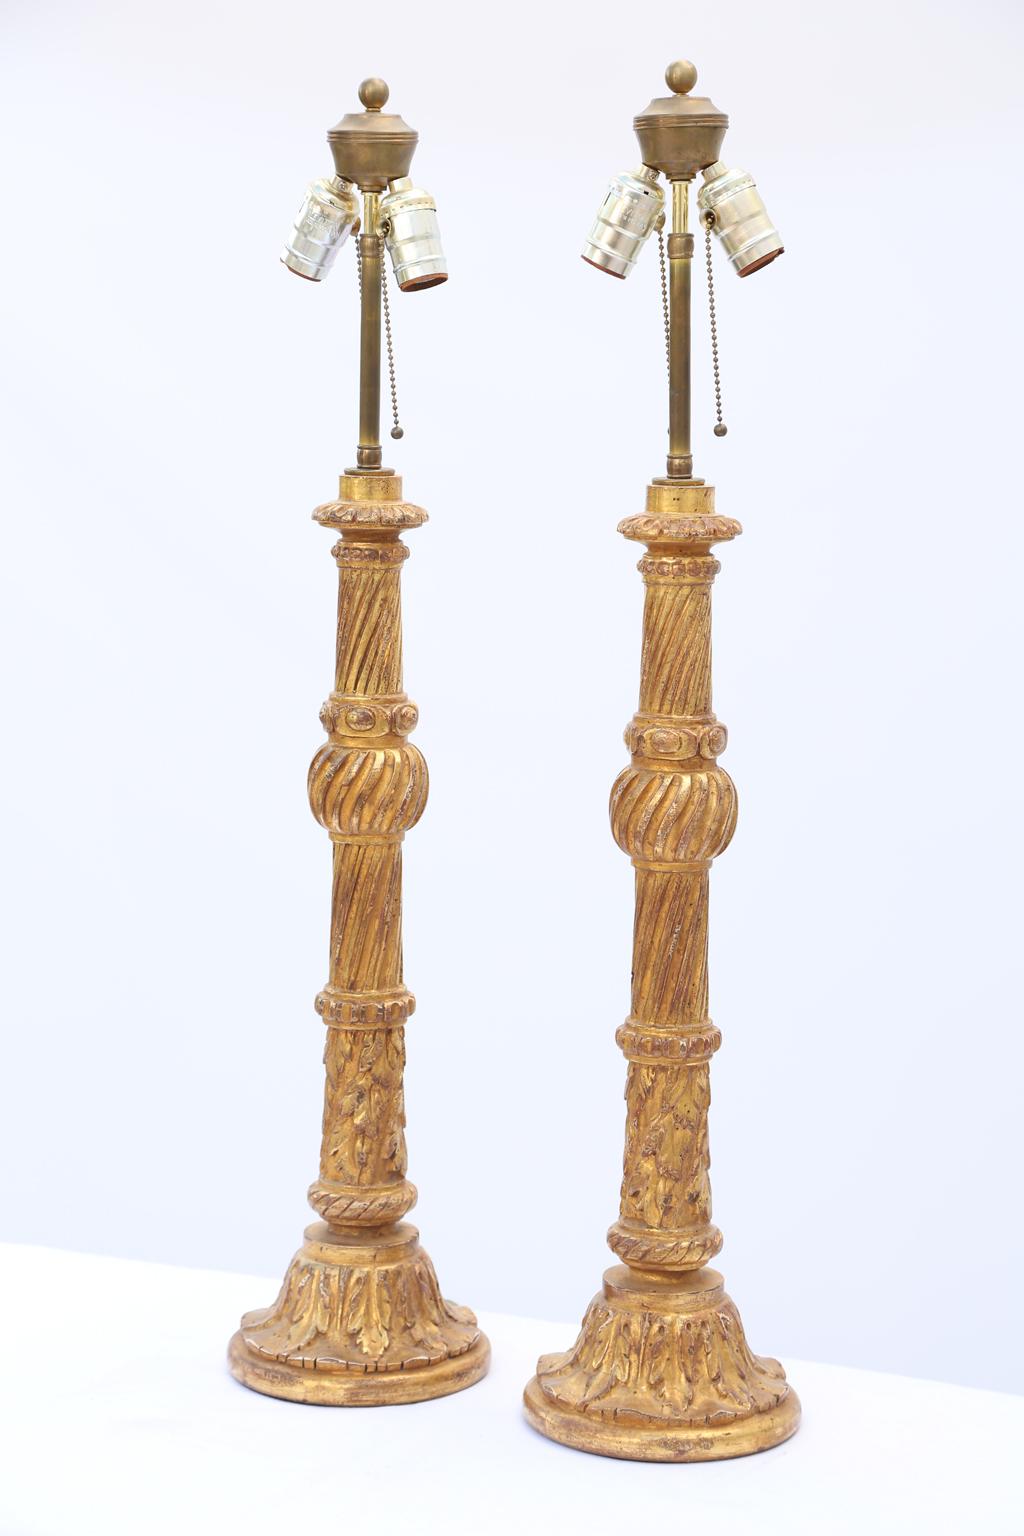 Pair of lamps, of giltwood, each a tall candlestick form, hand carved with raised spiral reeding, acanthus, and beading, raised on round footed base. 

Stock ID: D1998.